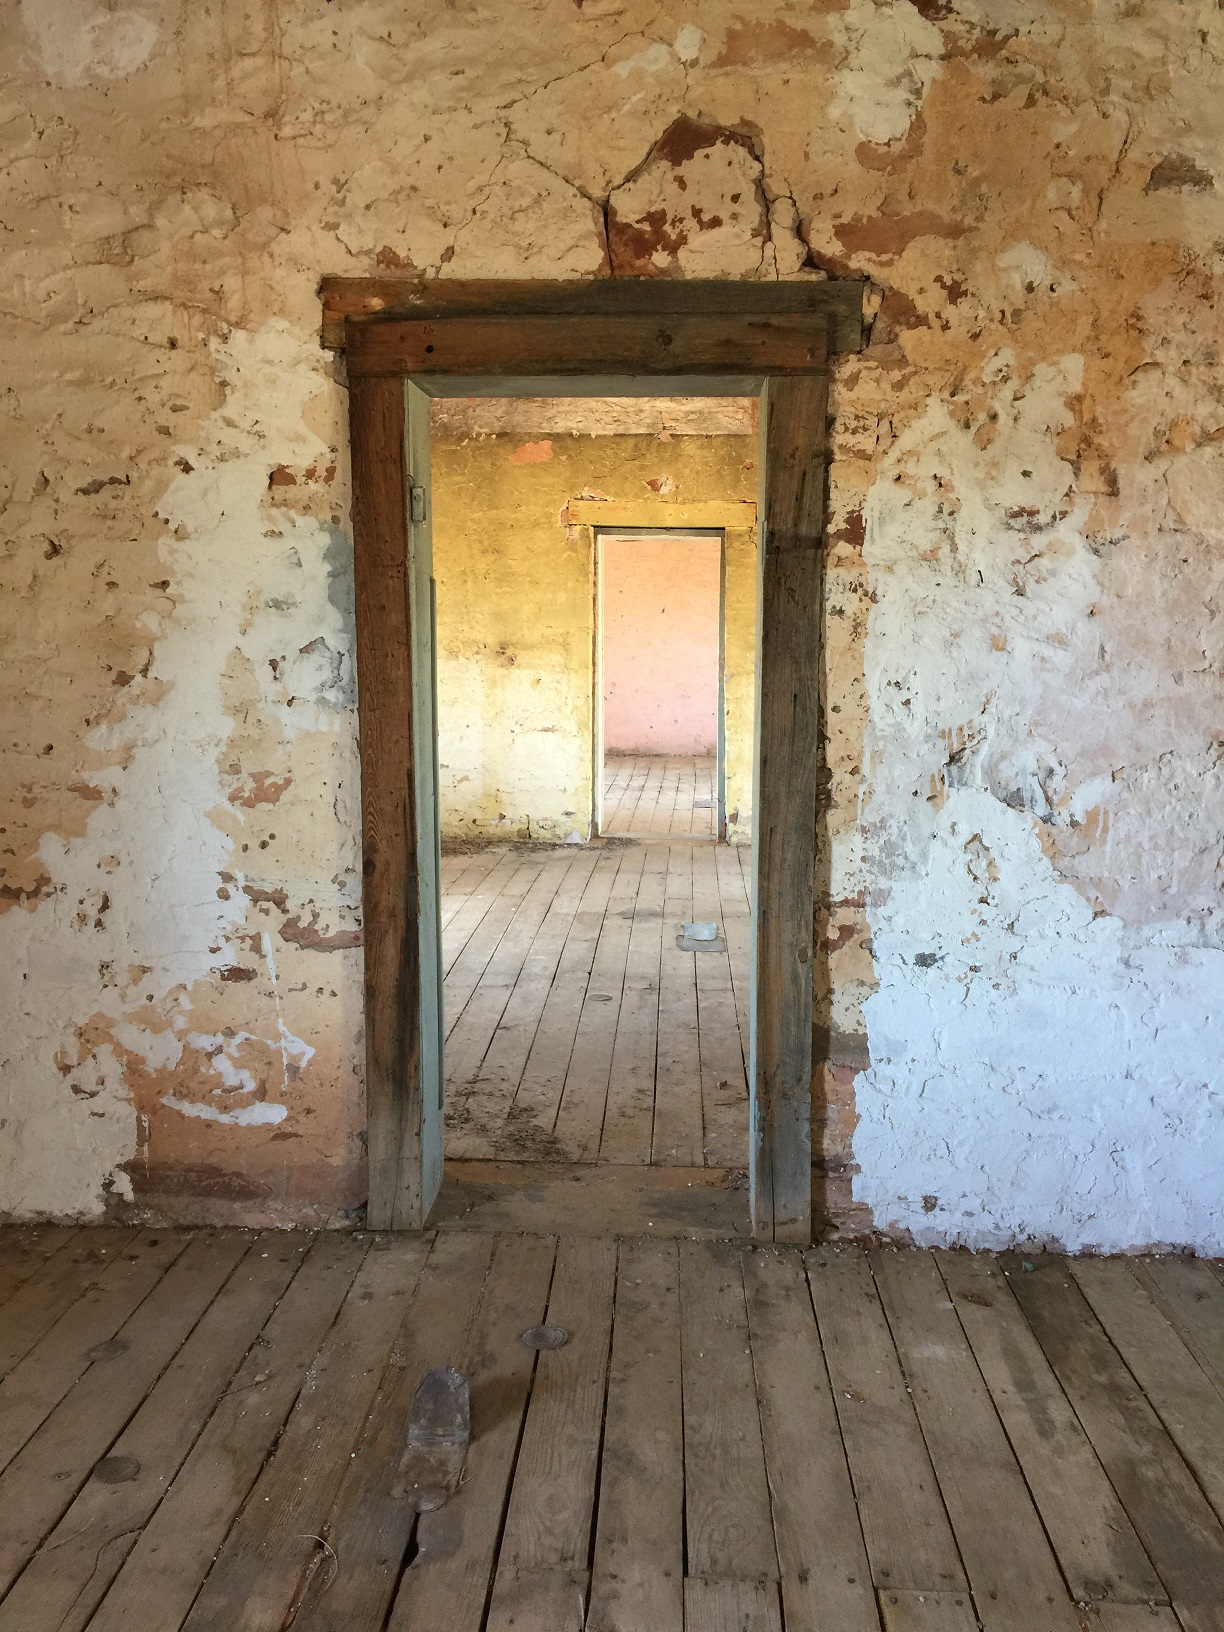 Three rooms in the bunkhouse at the Grand Gulch Mine